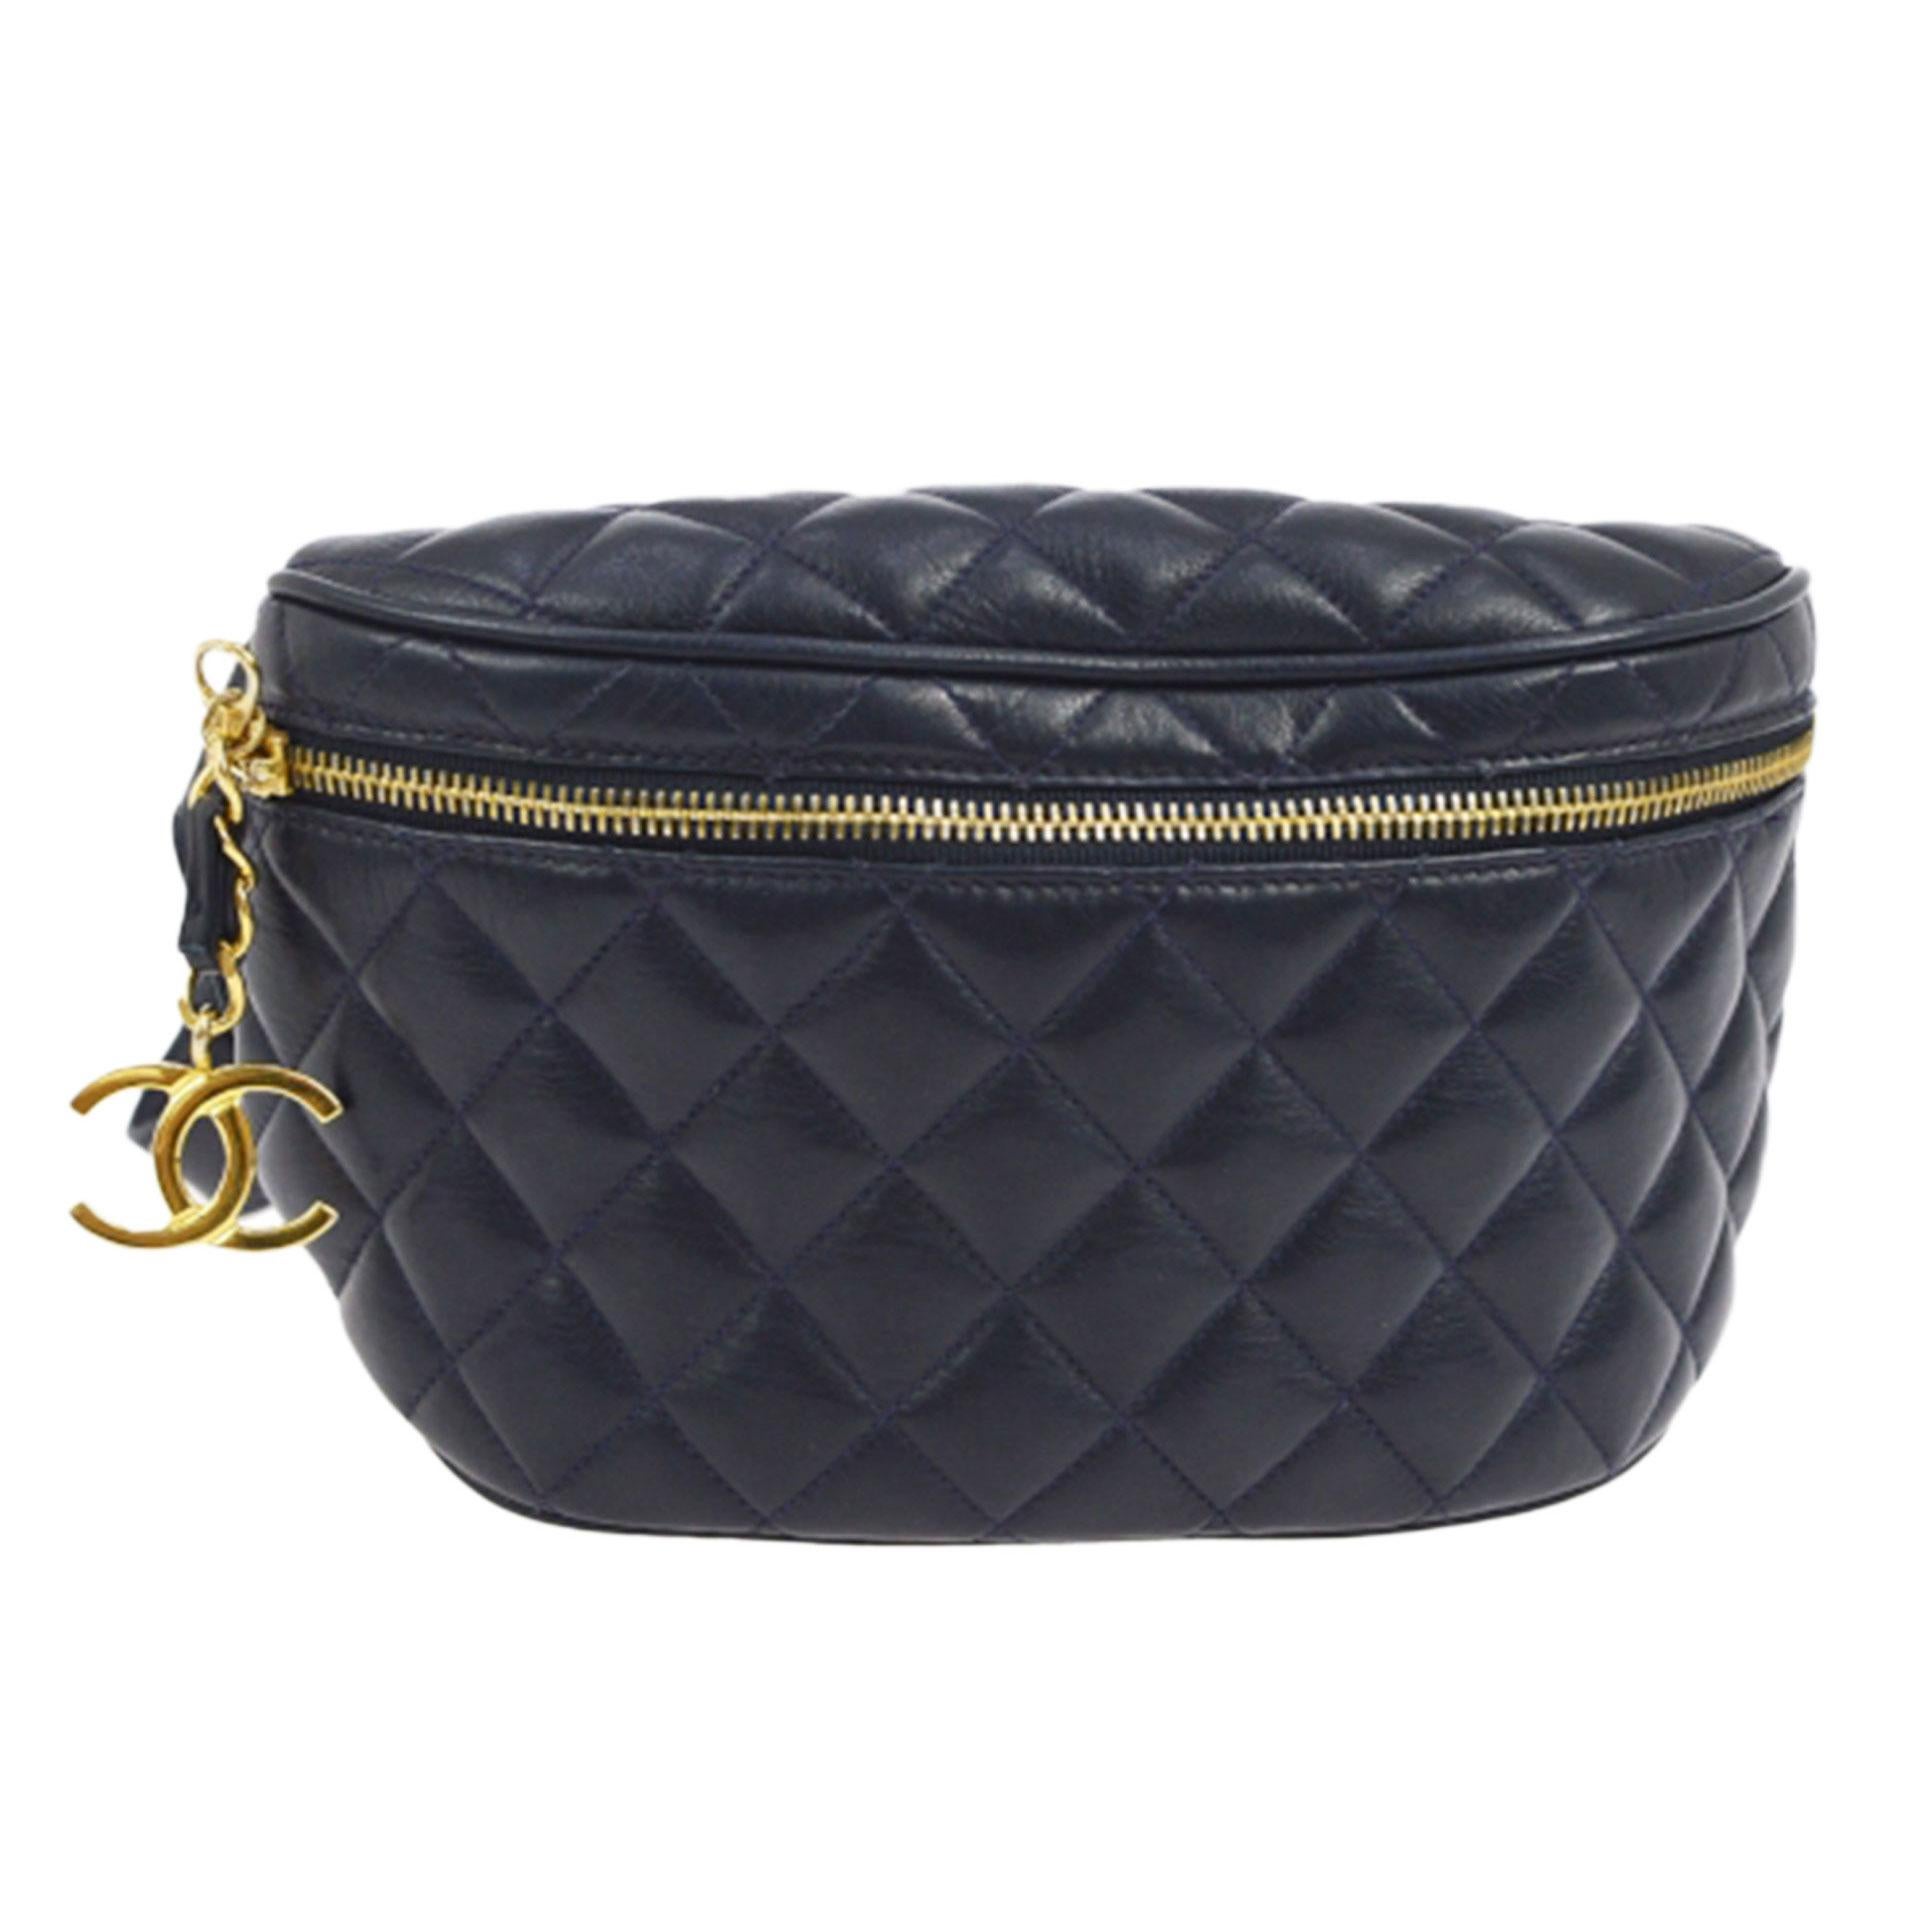 Chanel vintage quilted leather fanny pack features gold hardware.

1991 {Vintage 33 Years}
Gold Hardware
Navy blue quilted lambskin leather
CC logo medallion charm 
Zippered closure
Waist size is 75 cm / 30